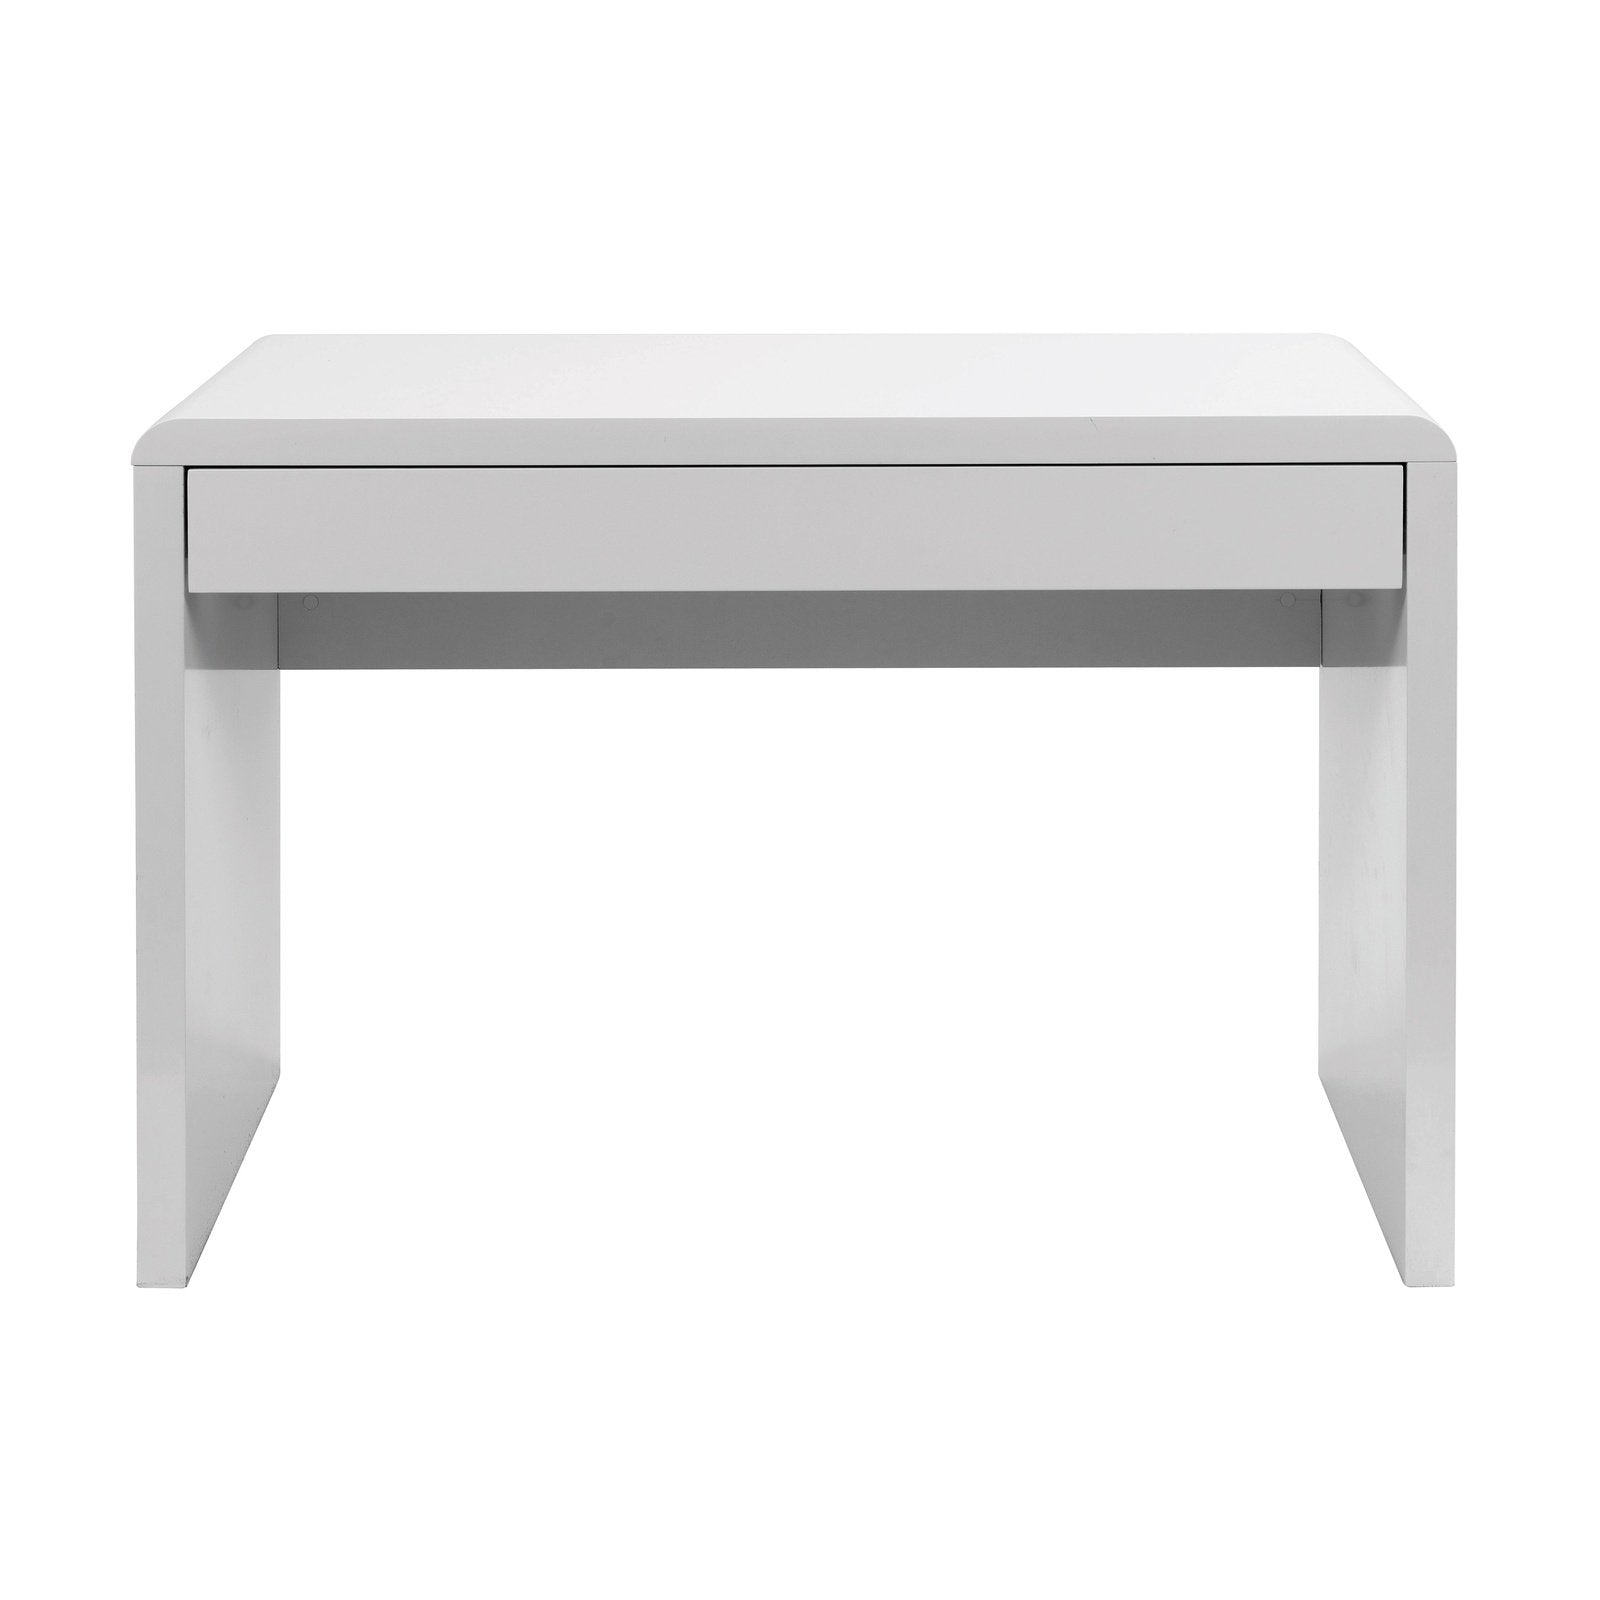 Compact and Curvaceous High Gloss Workstation with Spacious Storage Drawer - Office Products Online